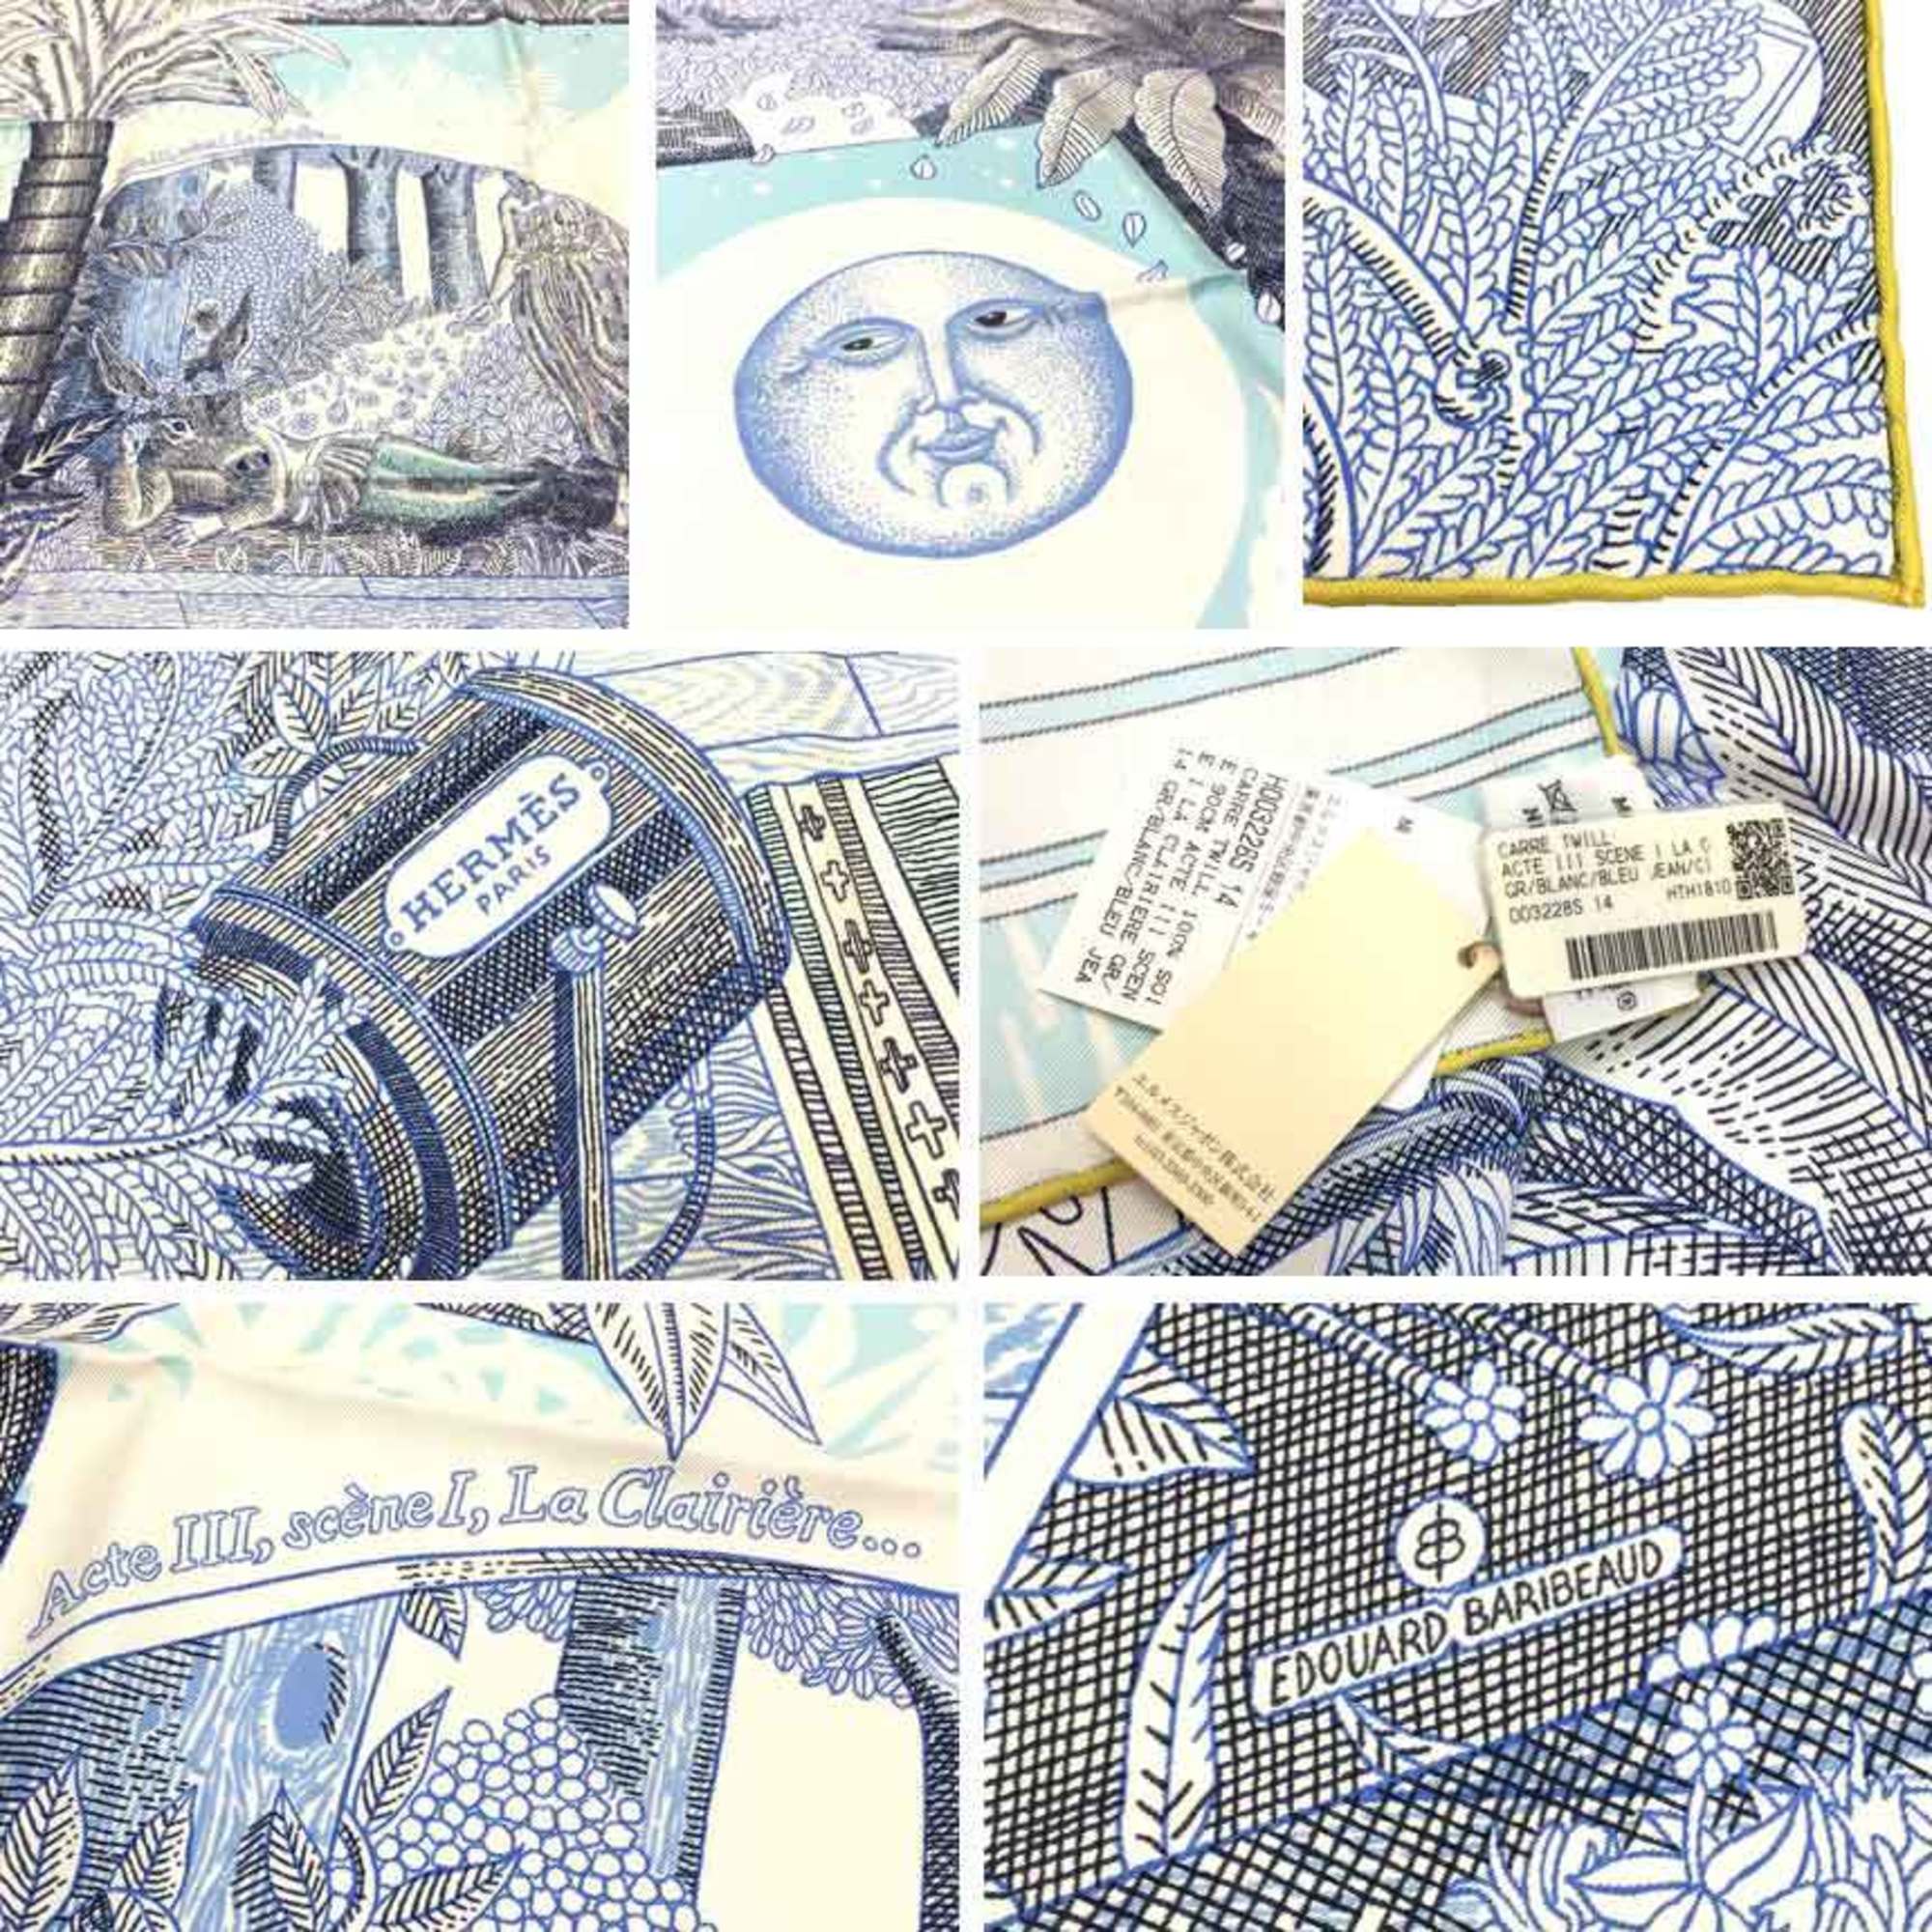 HERMES Scarf Muffler Carré 90 Act III Scene I La Clairiere 3, 1, In the Forest Glade H003228S Moon Shakespeare 100% Silk Blue GR/BLANC/BLEU JEAN aq10143 10013839